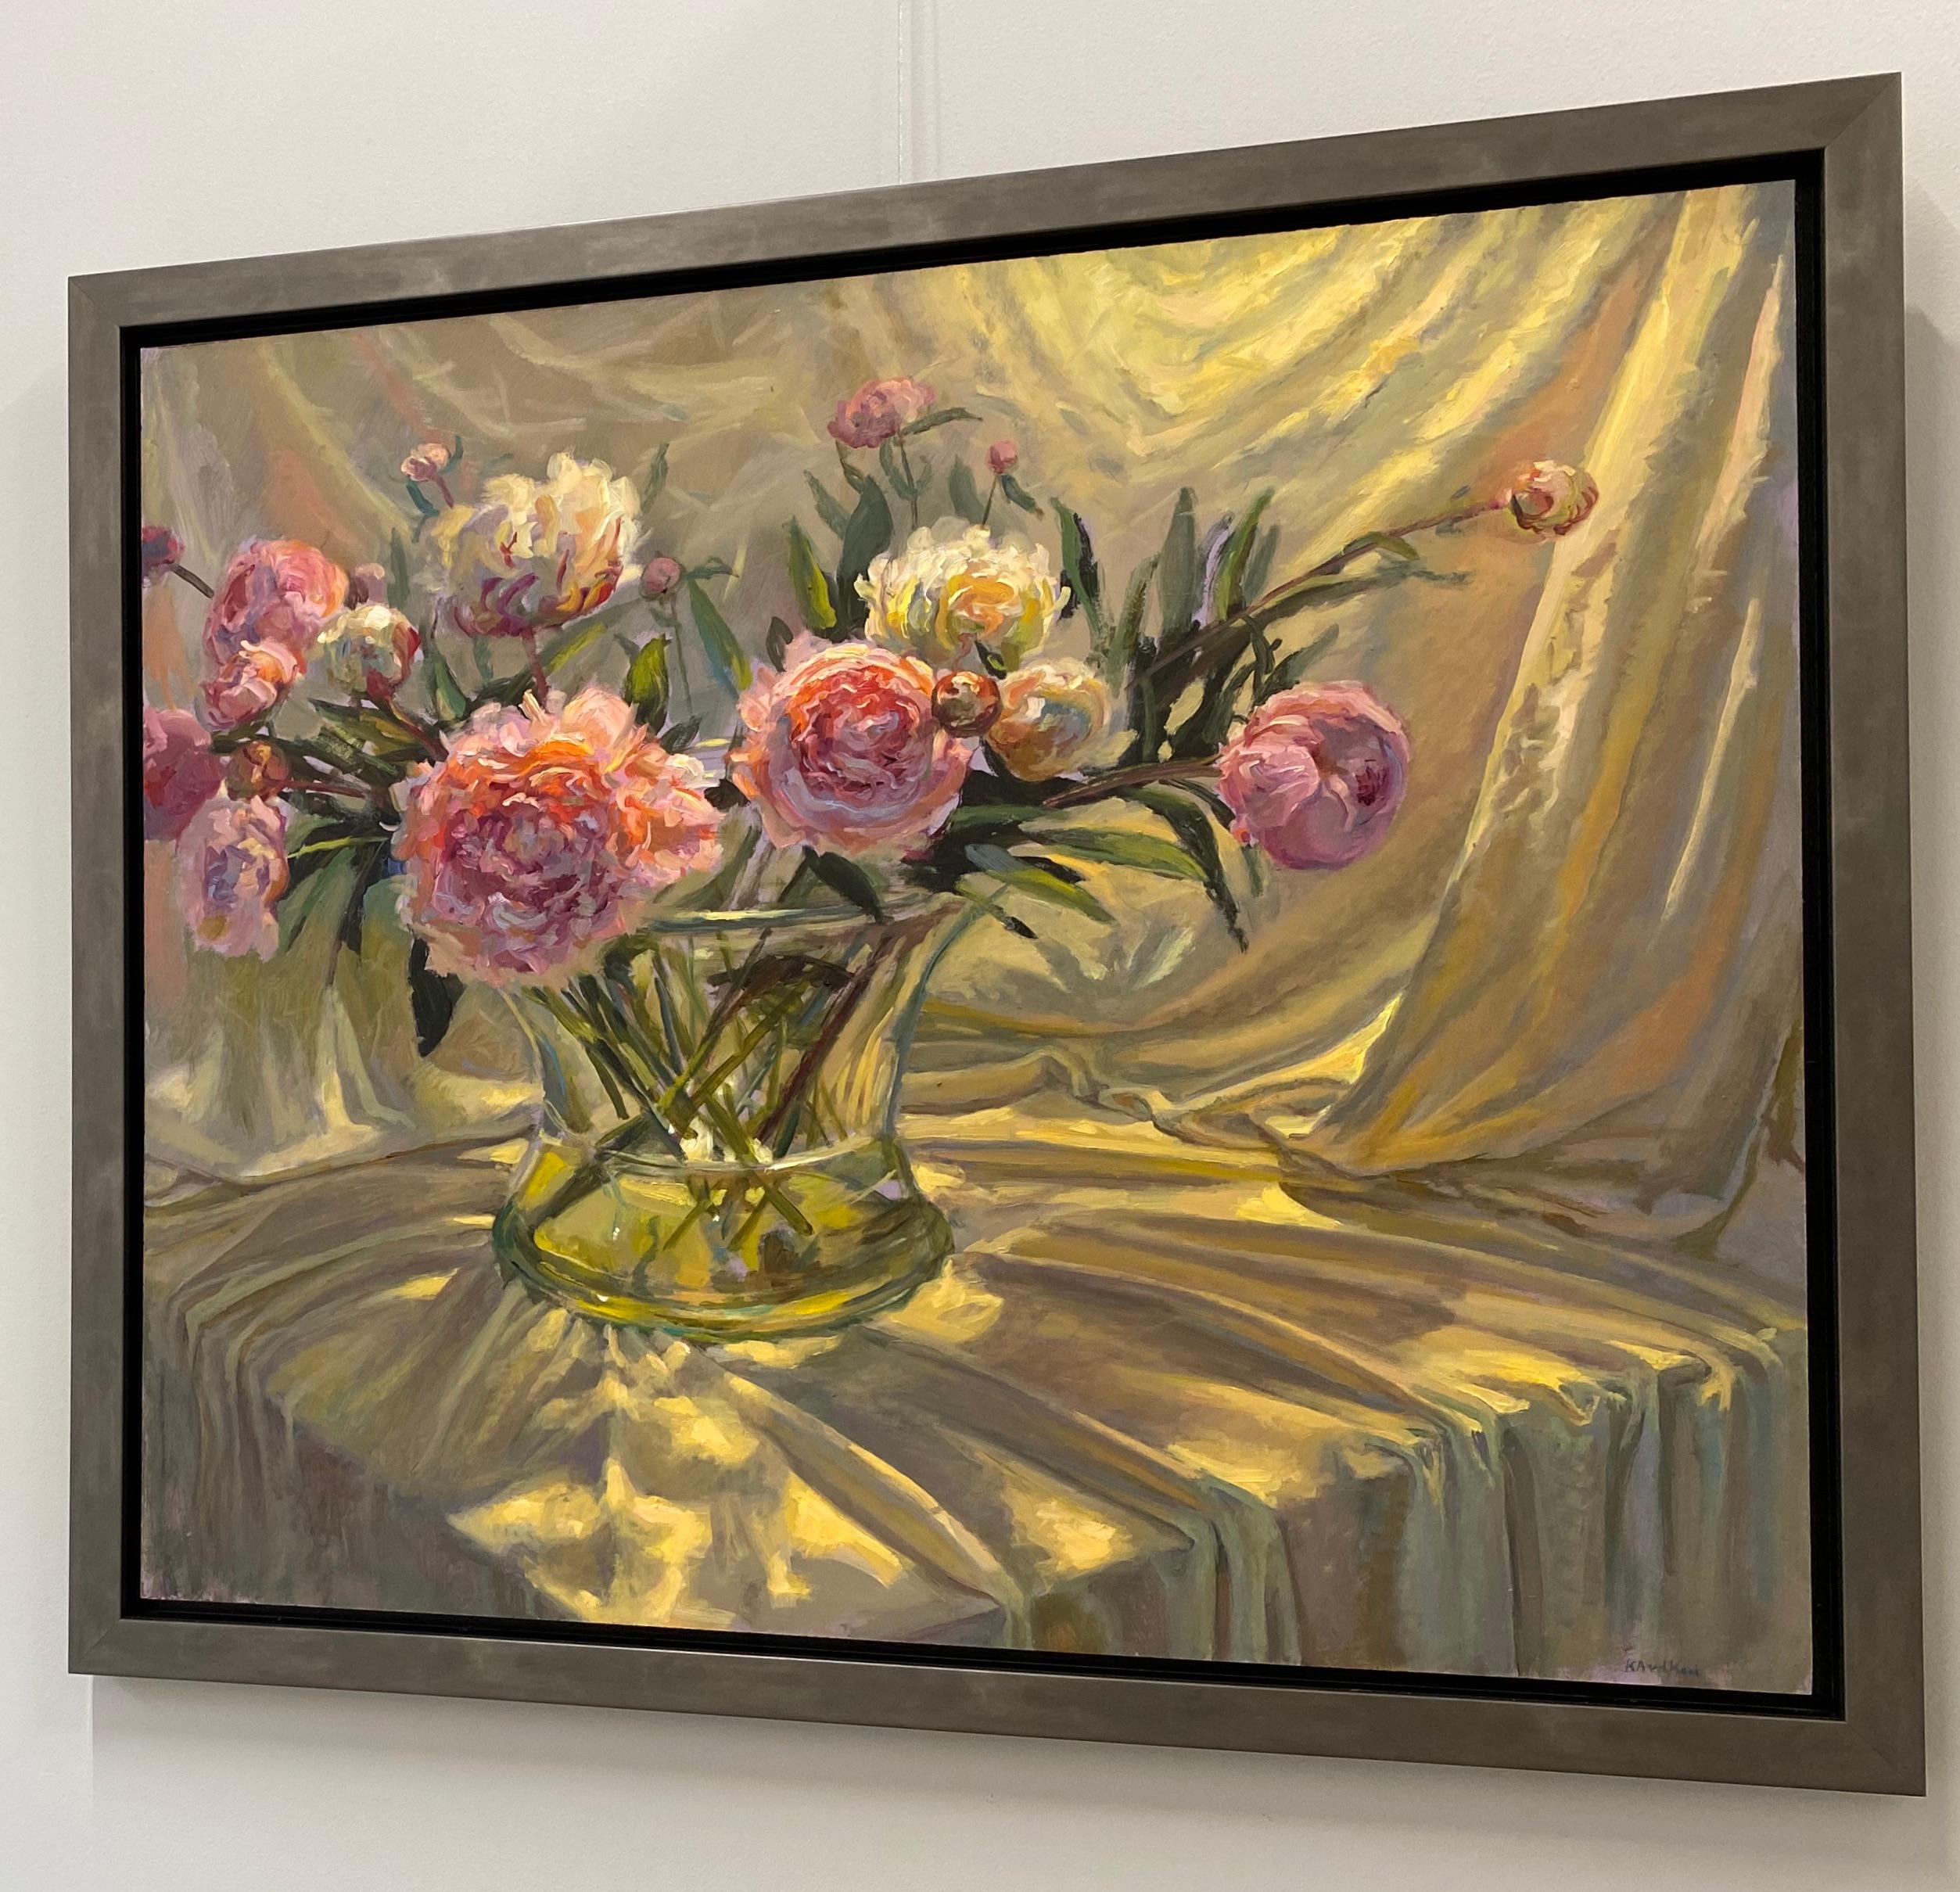 Peonies - 21st Century Colorful Impressionistic oil painting with flowers - Contemporary Painting by Keimpe van der Kooi